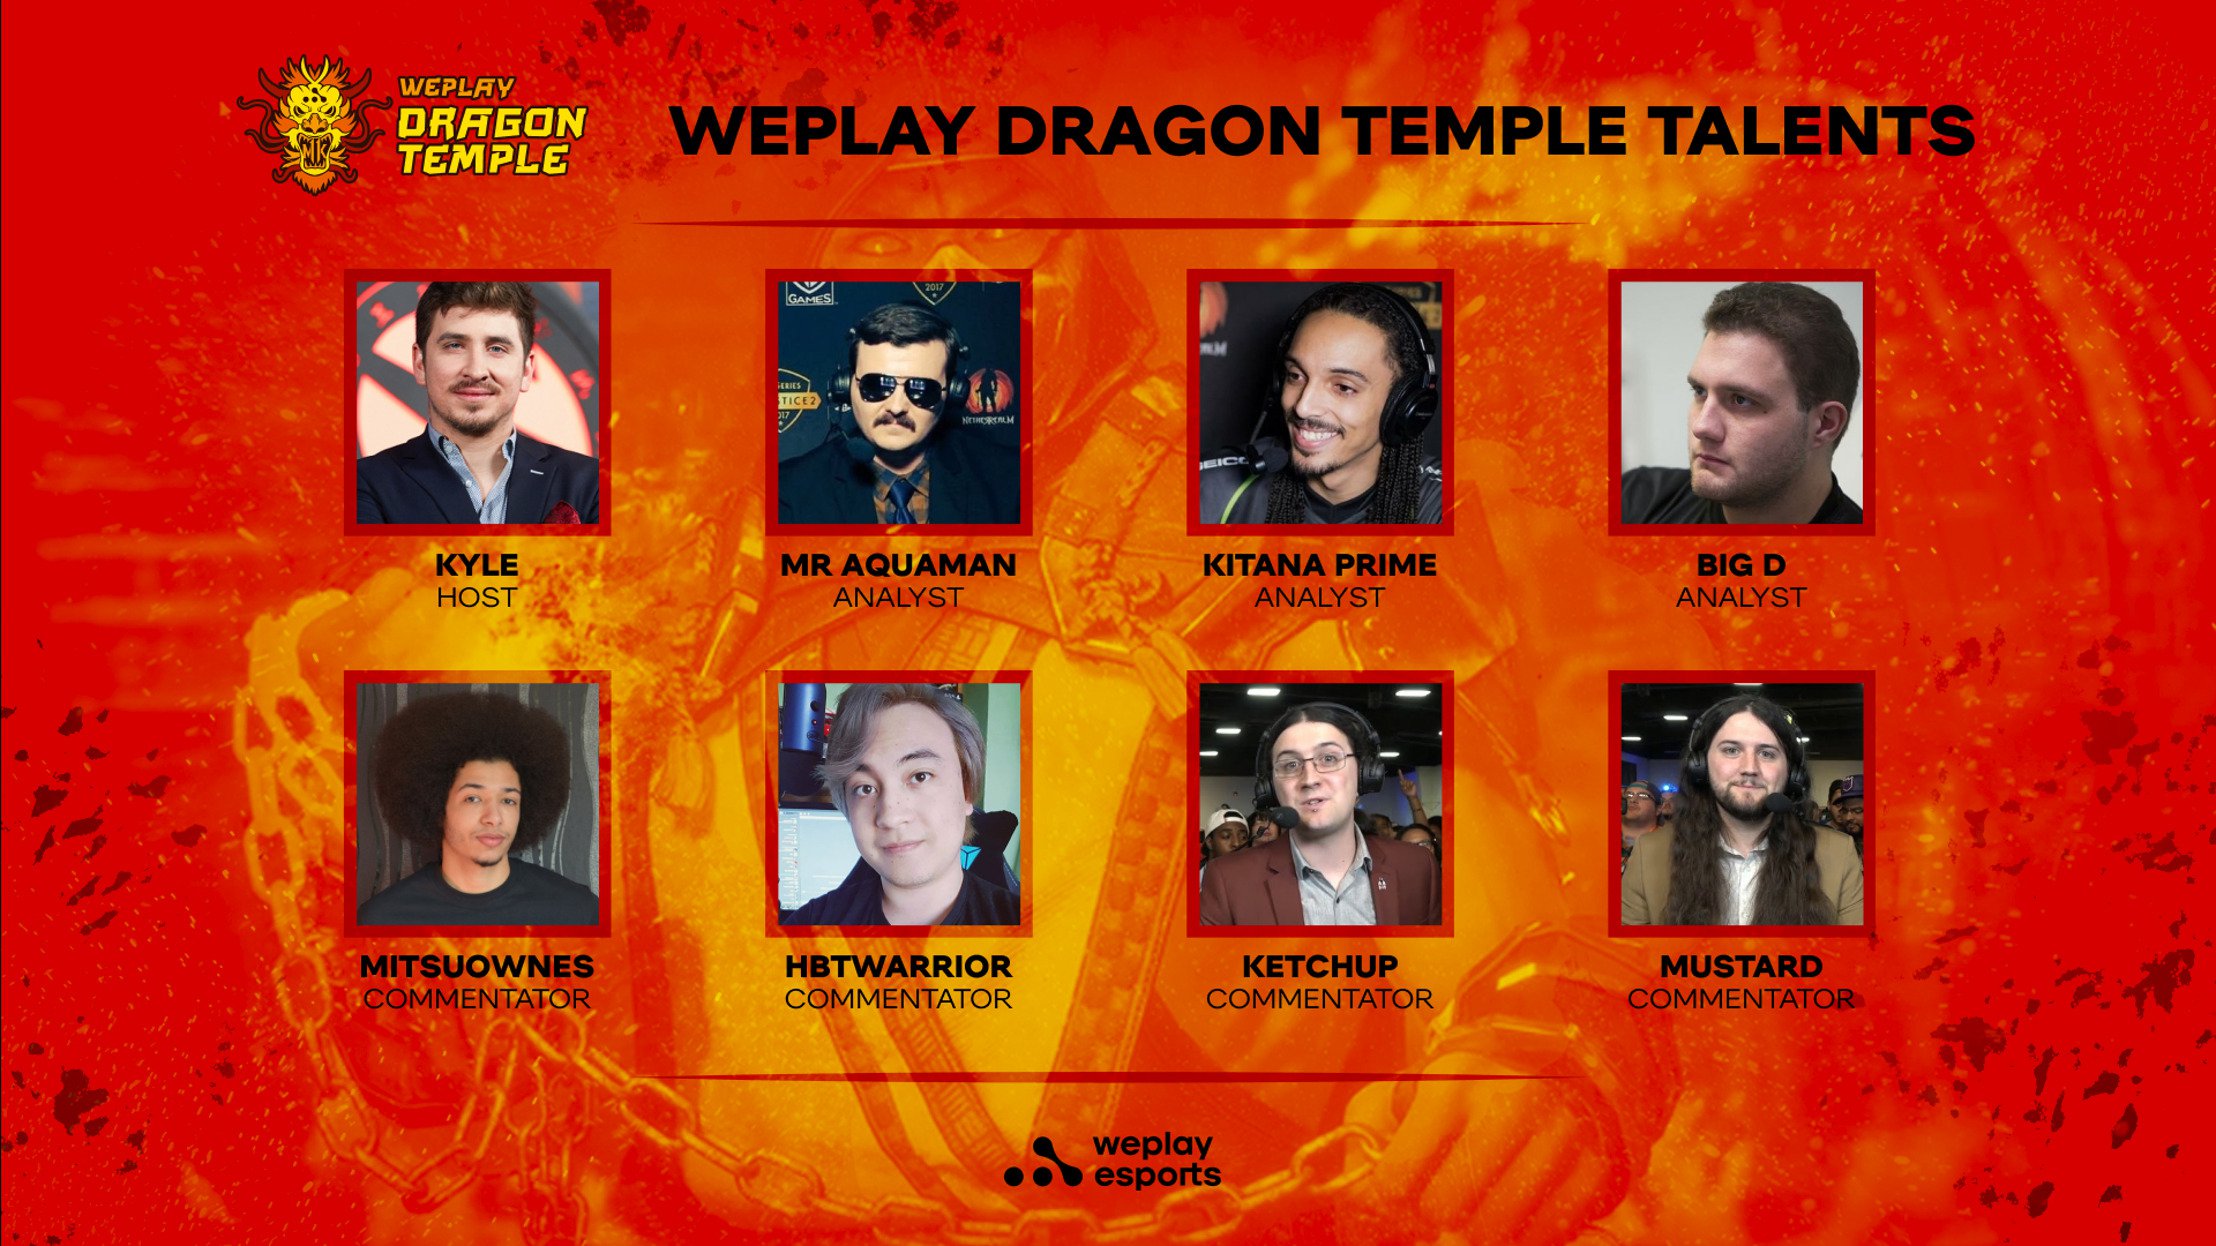 The full list of WePlay Dragon Temple Talents